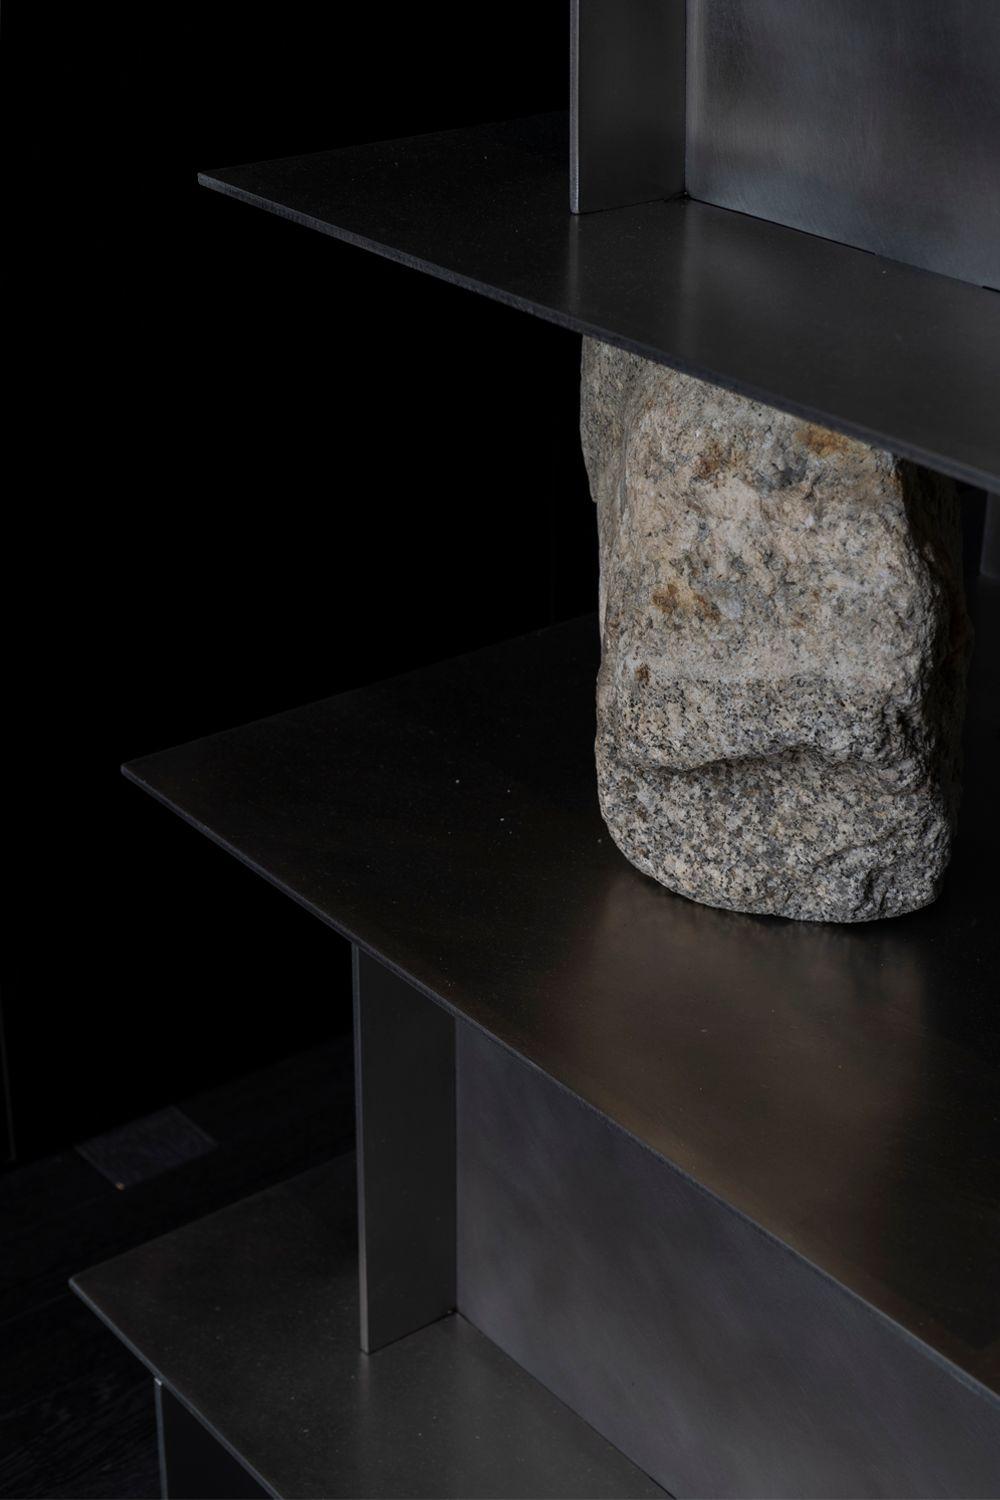 Proportions of Stone Shelf Level 05 by Lee Sisan
Dimensions: W 64 x D 59 x H 110 cm
Materials: Stainless steel, natural stone

Each piece is made to order and uses natural stones, so please expect some variability in design.

Is constructed by